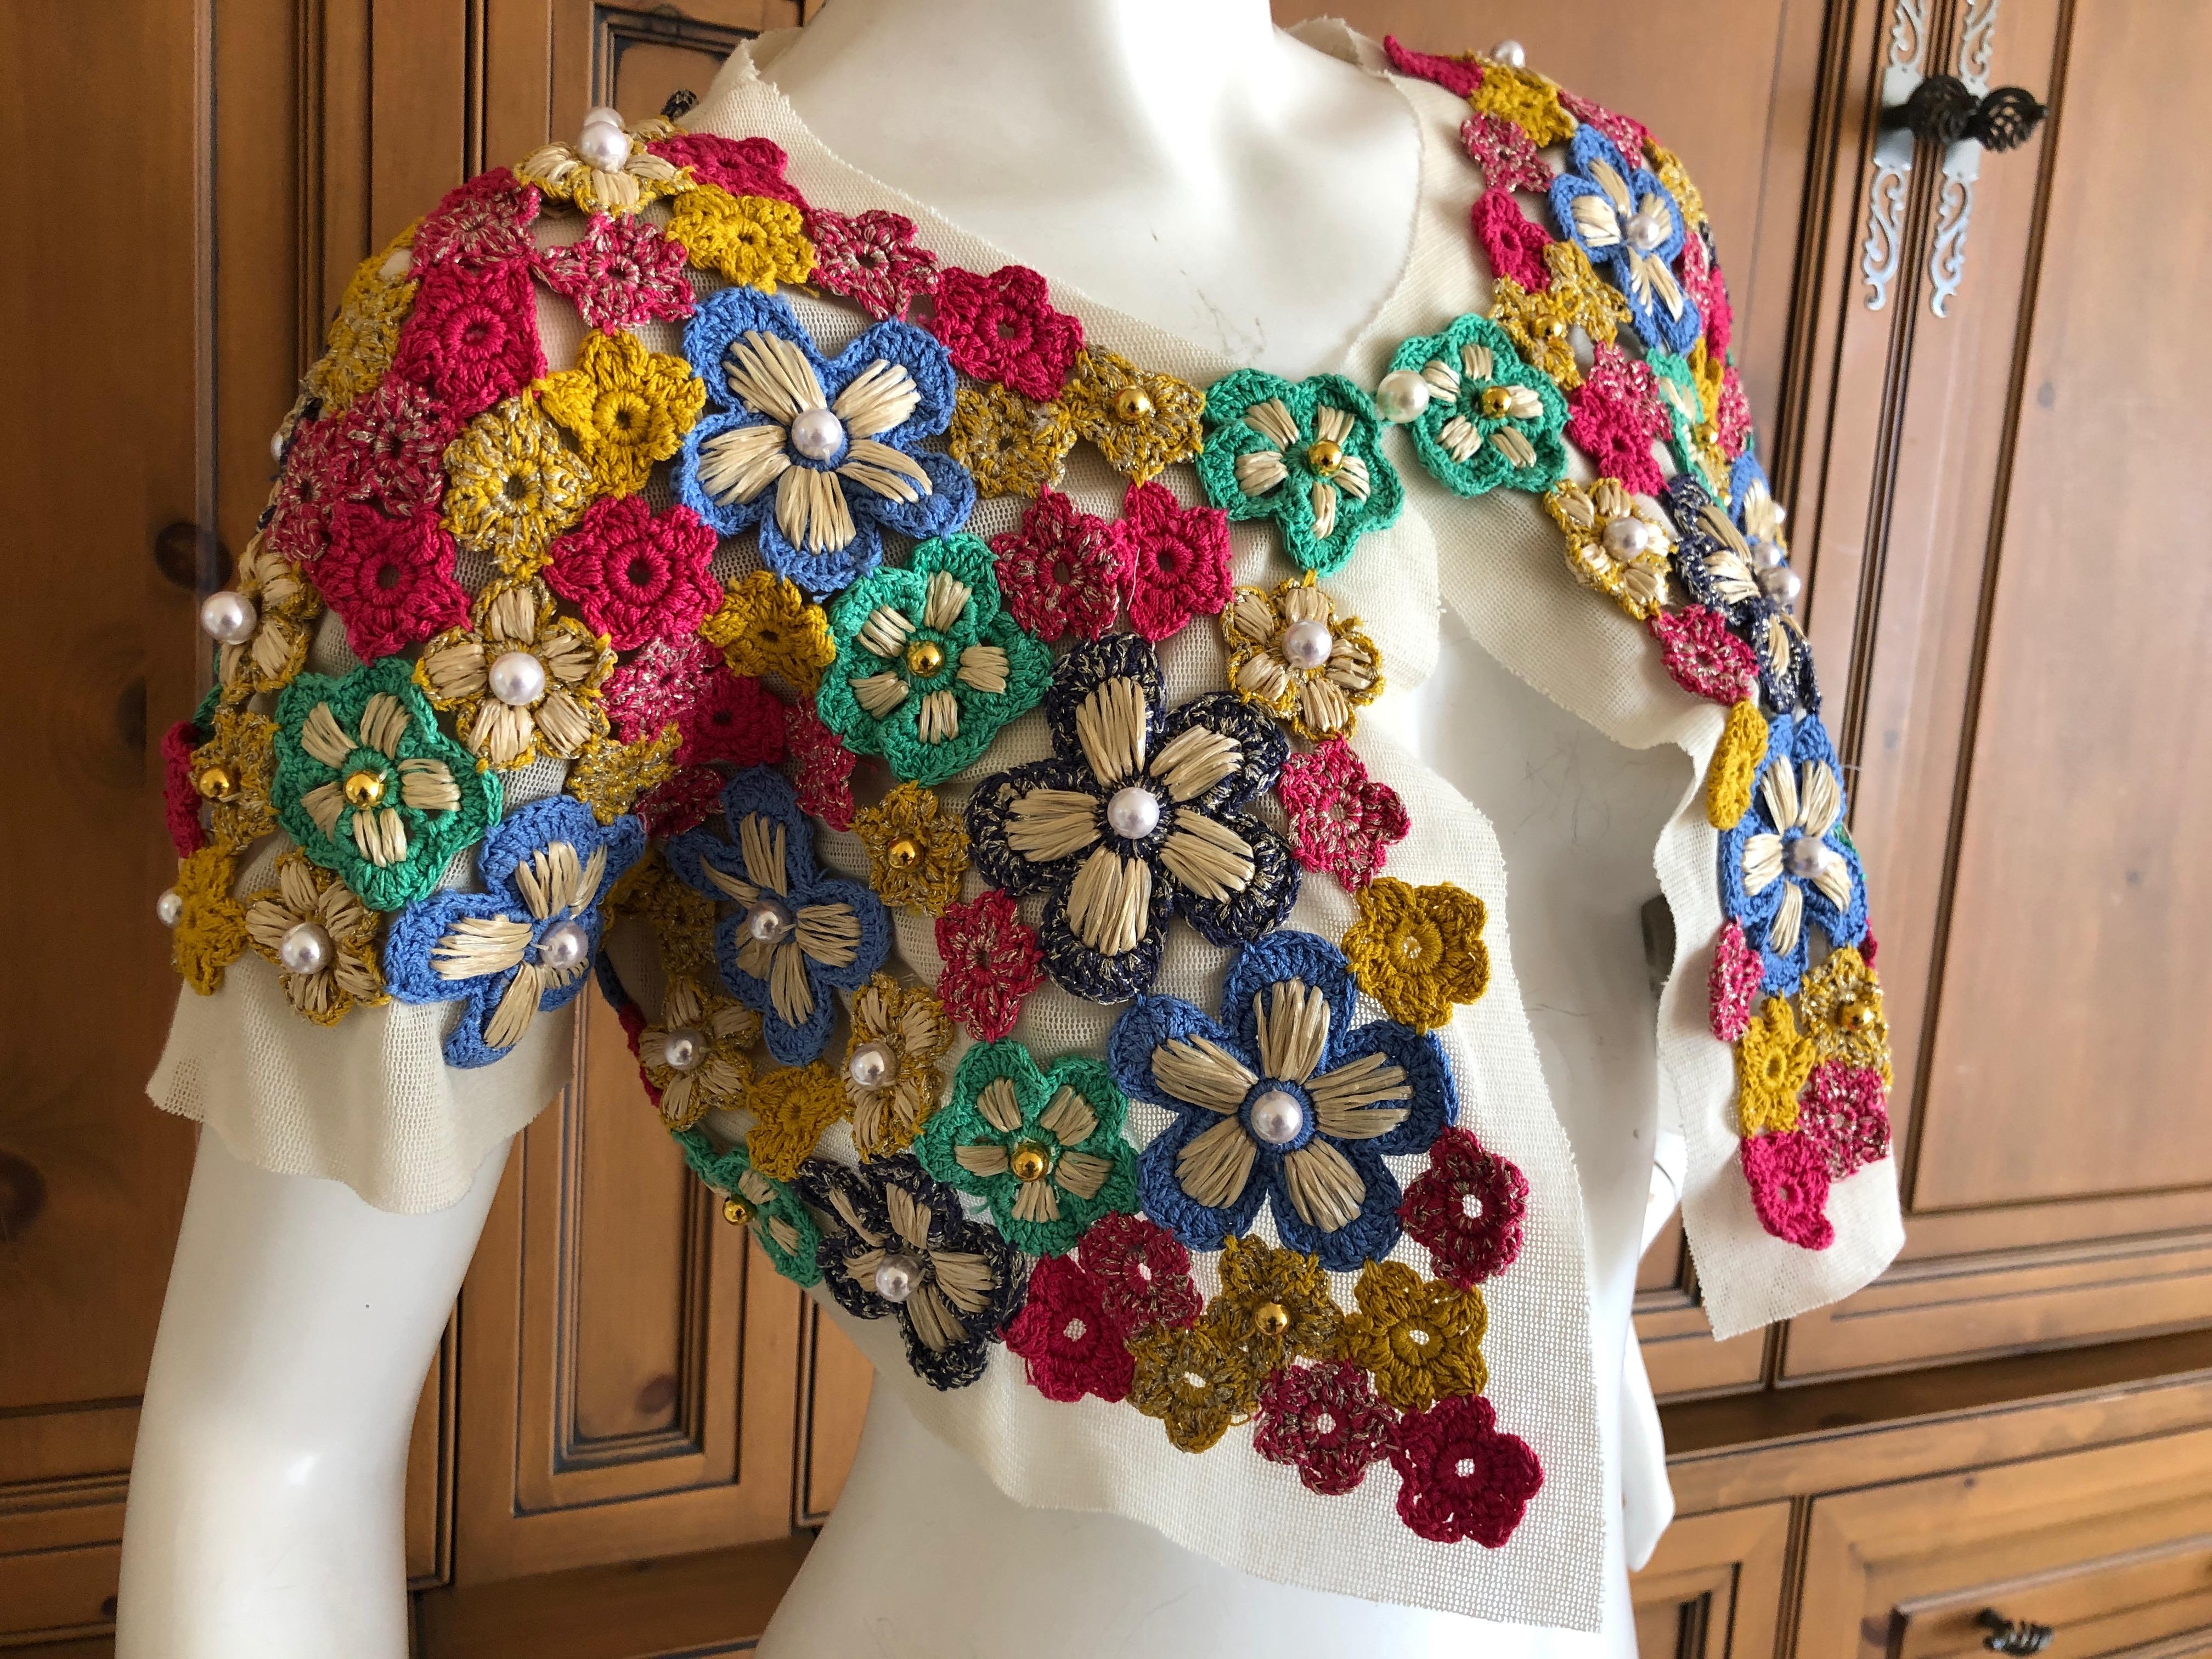 Women's Moschino Hippy Chick Crochet Embellished Shrug for Cheap & Chic For Sale